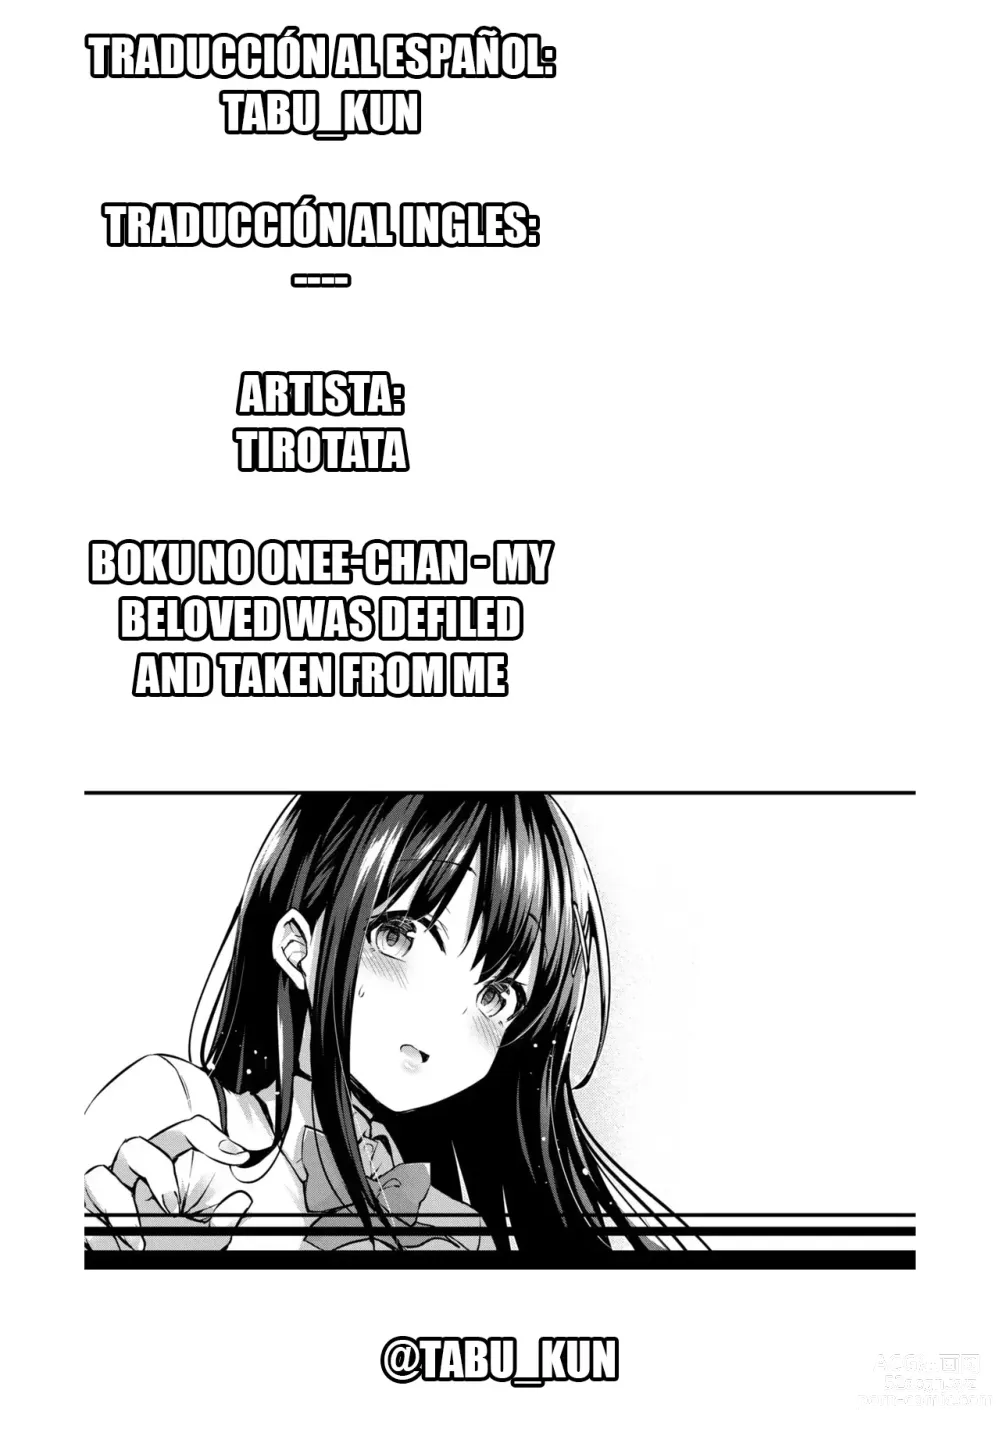 Page 35 of manga Boku no Onee-chan - My beloved was defiled and taken from me...